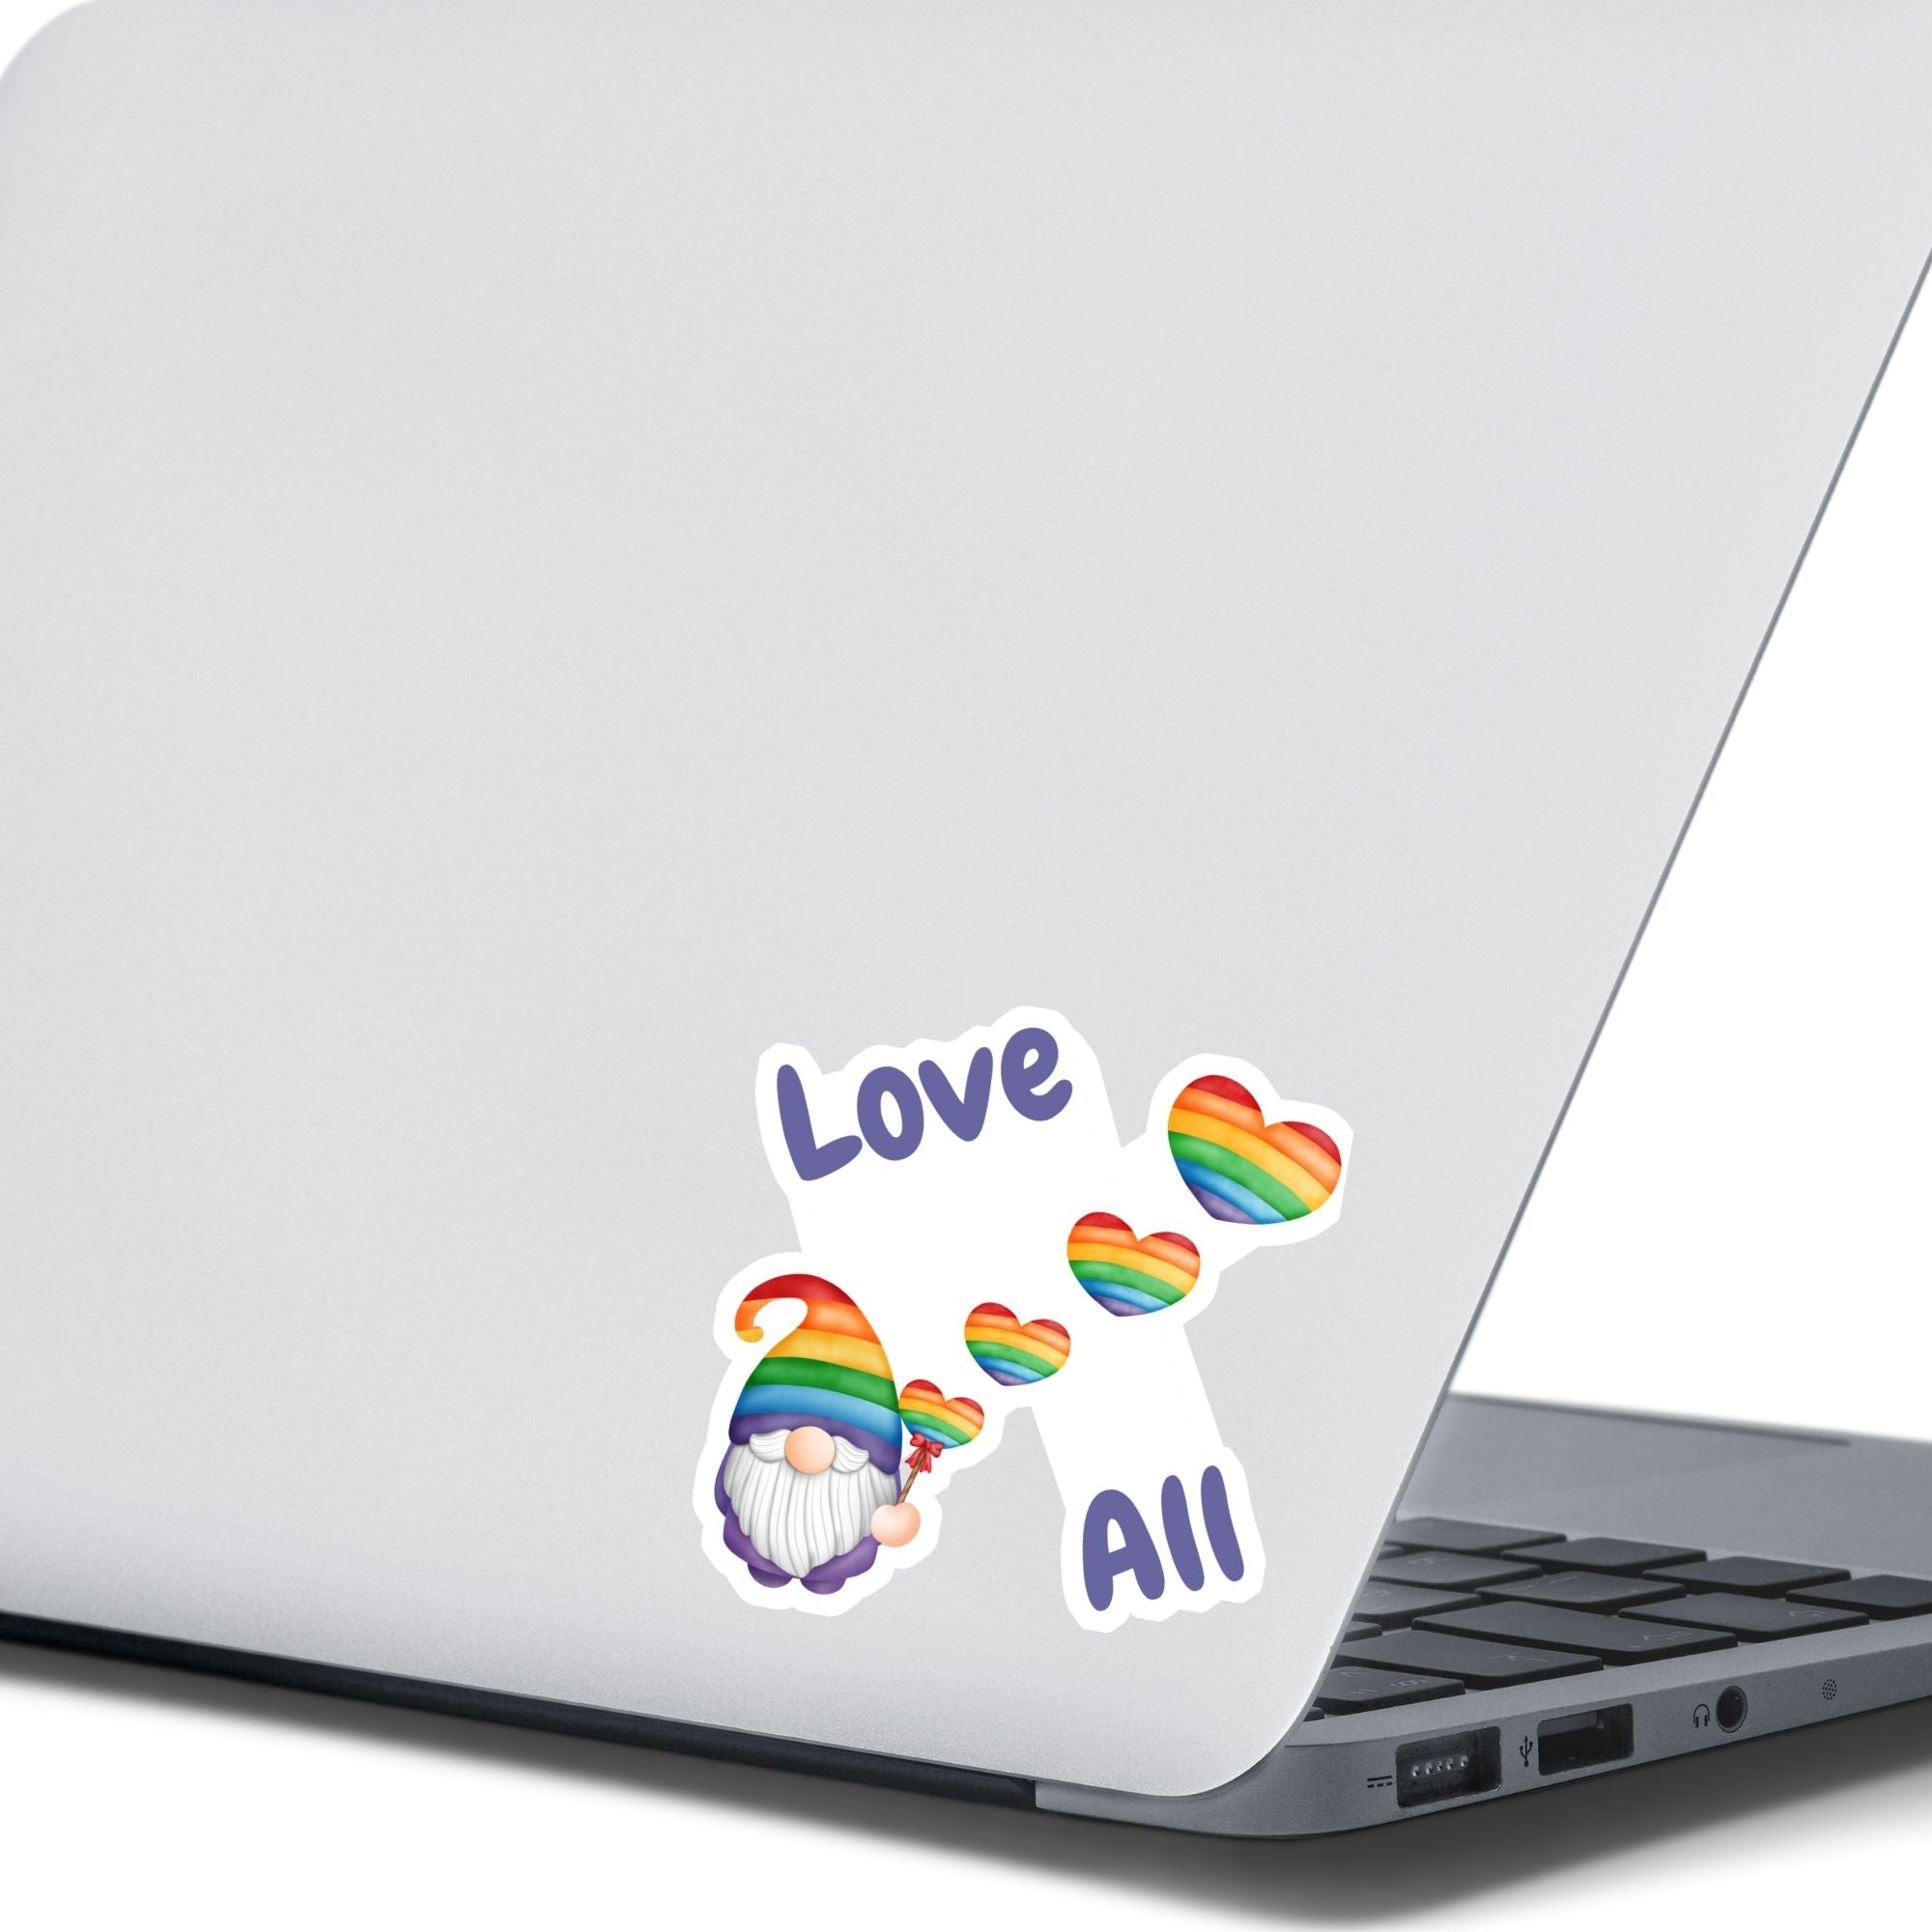 This gnome is showing his Pride! With the words "Love All", this individual die-cut sticker features a gnome with a rainbow hat and rainbow heart balloons. This image shows the Gnome Love All sticker on the back of an open laptop.